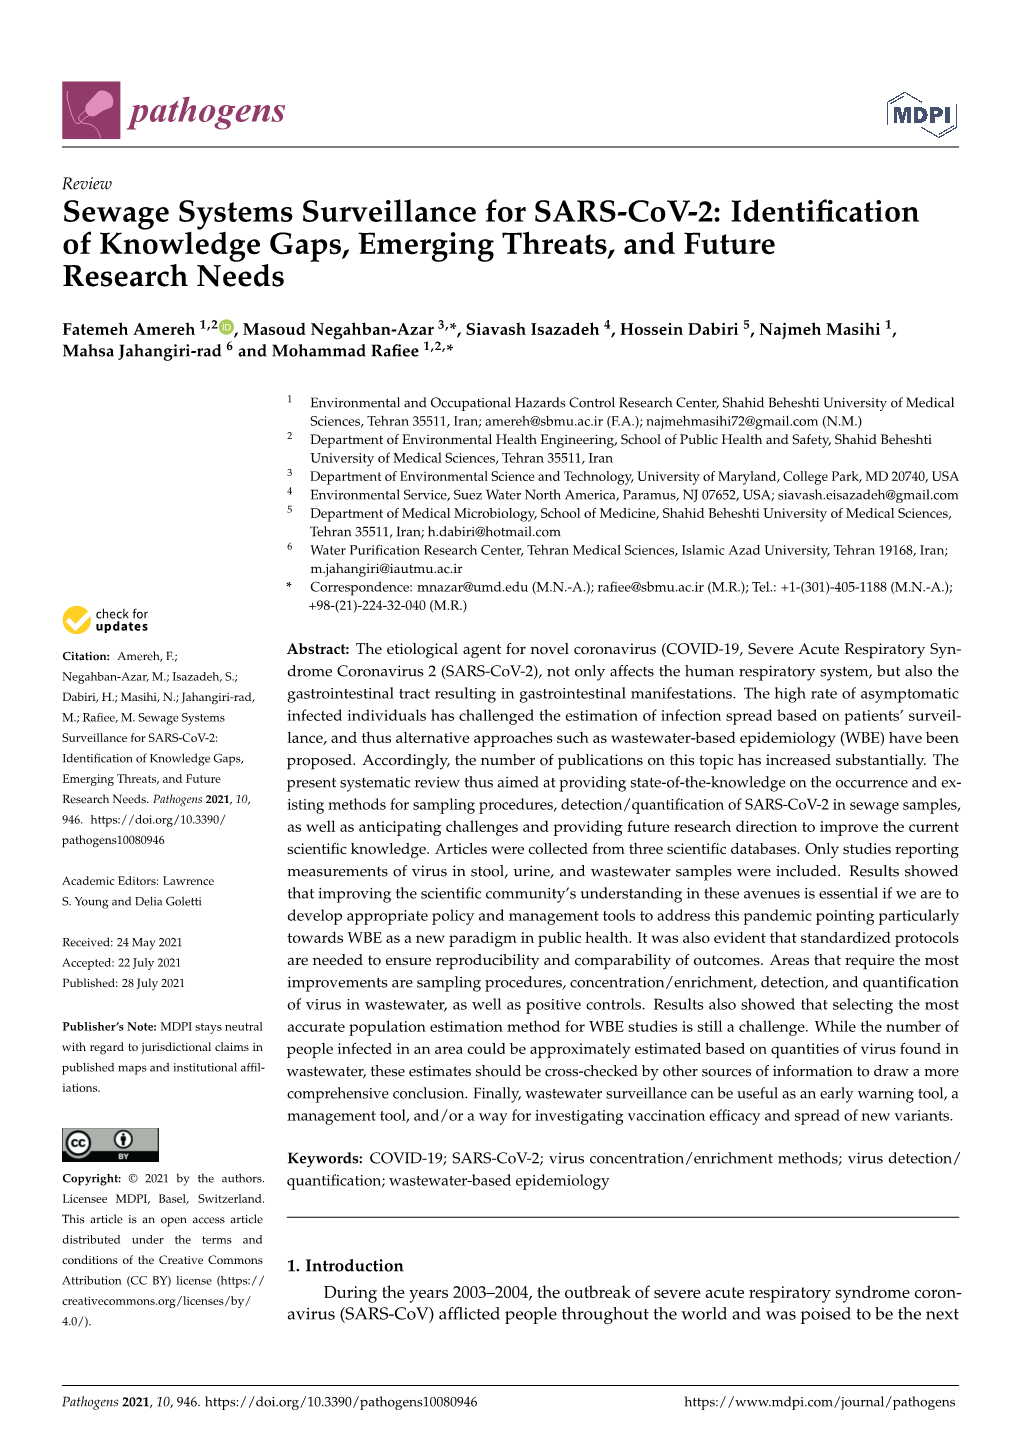 Sewage Systems Surveillance for SARS-Cov-2: Identiﬁcation of Knowledge Gaps, Emerging Threats, and Future Research Needs